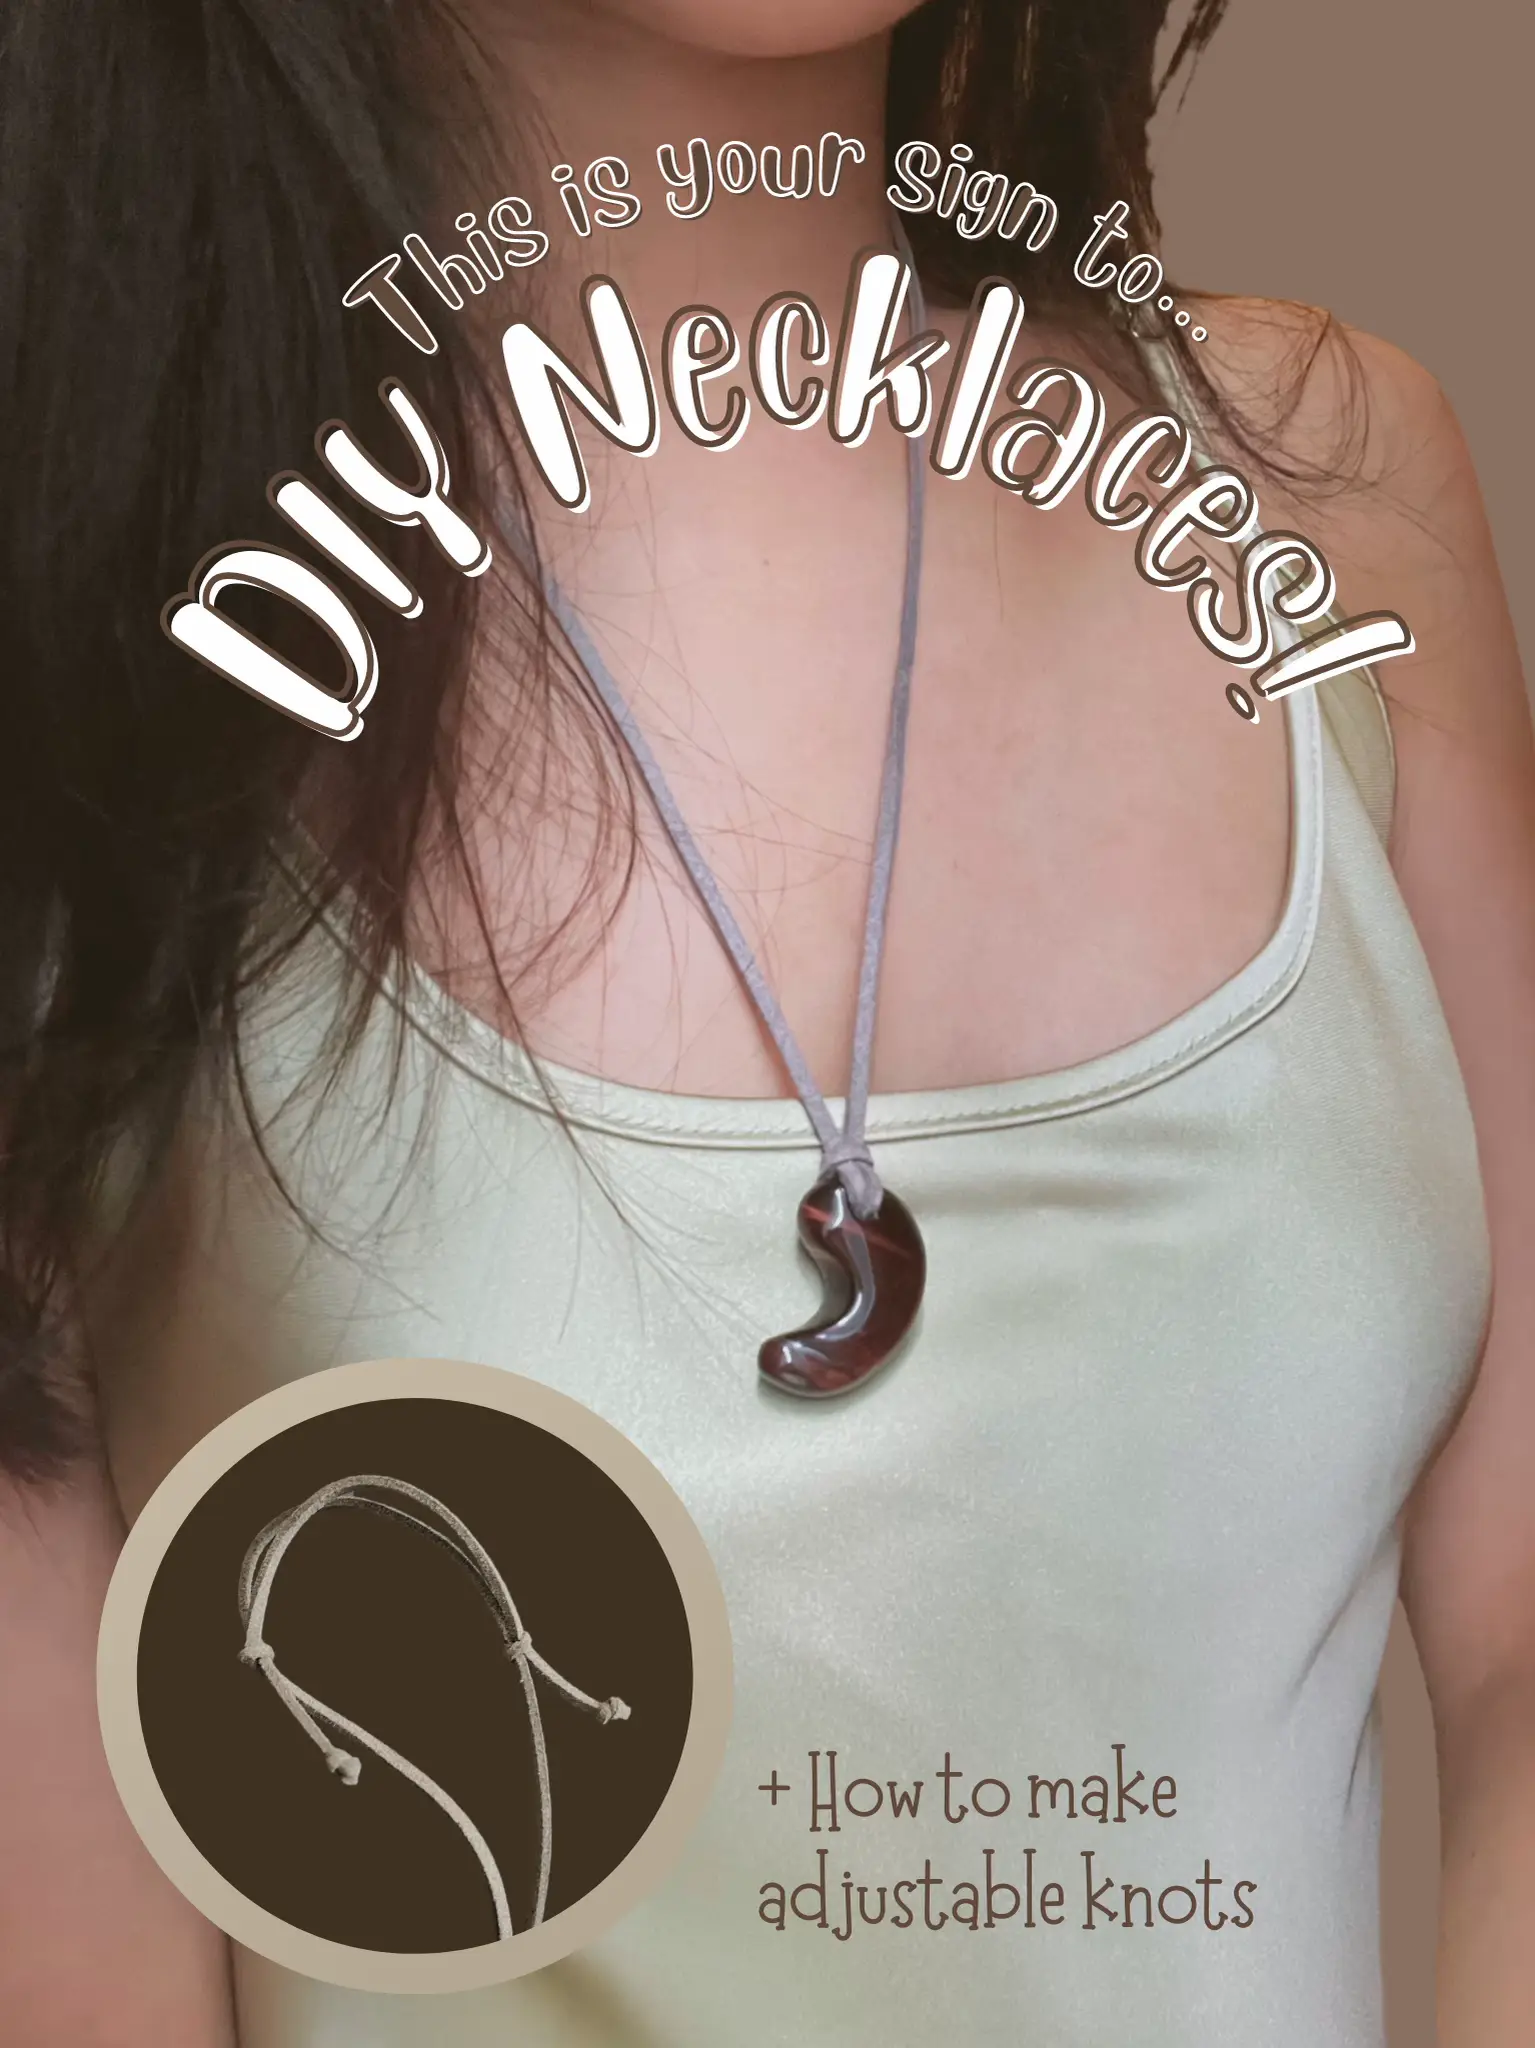 Be budget barbie & handmake necklaces for <$10!'s images(0)